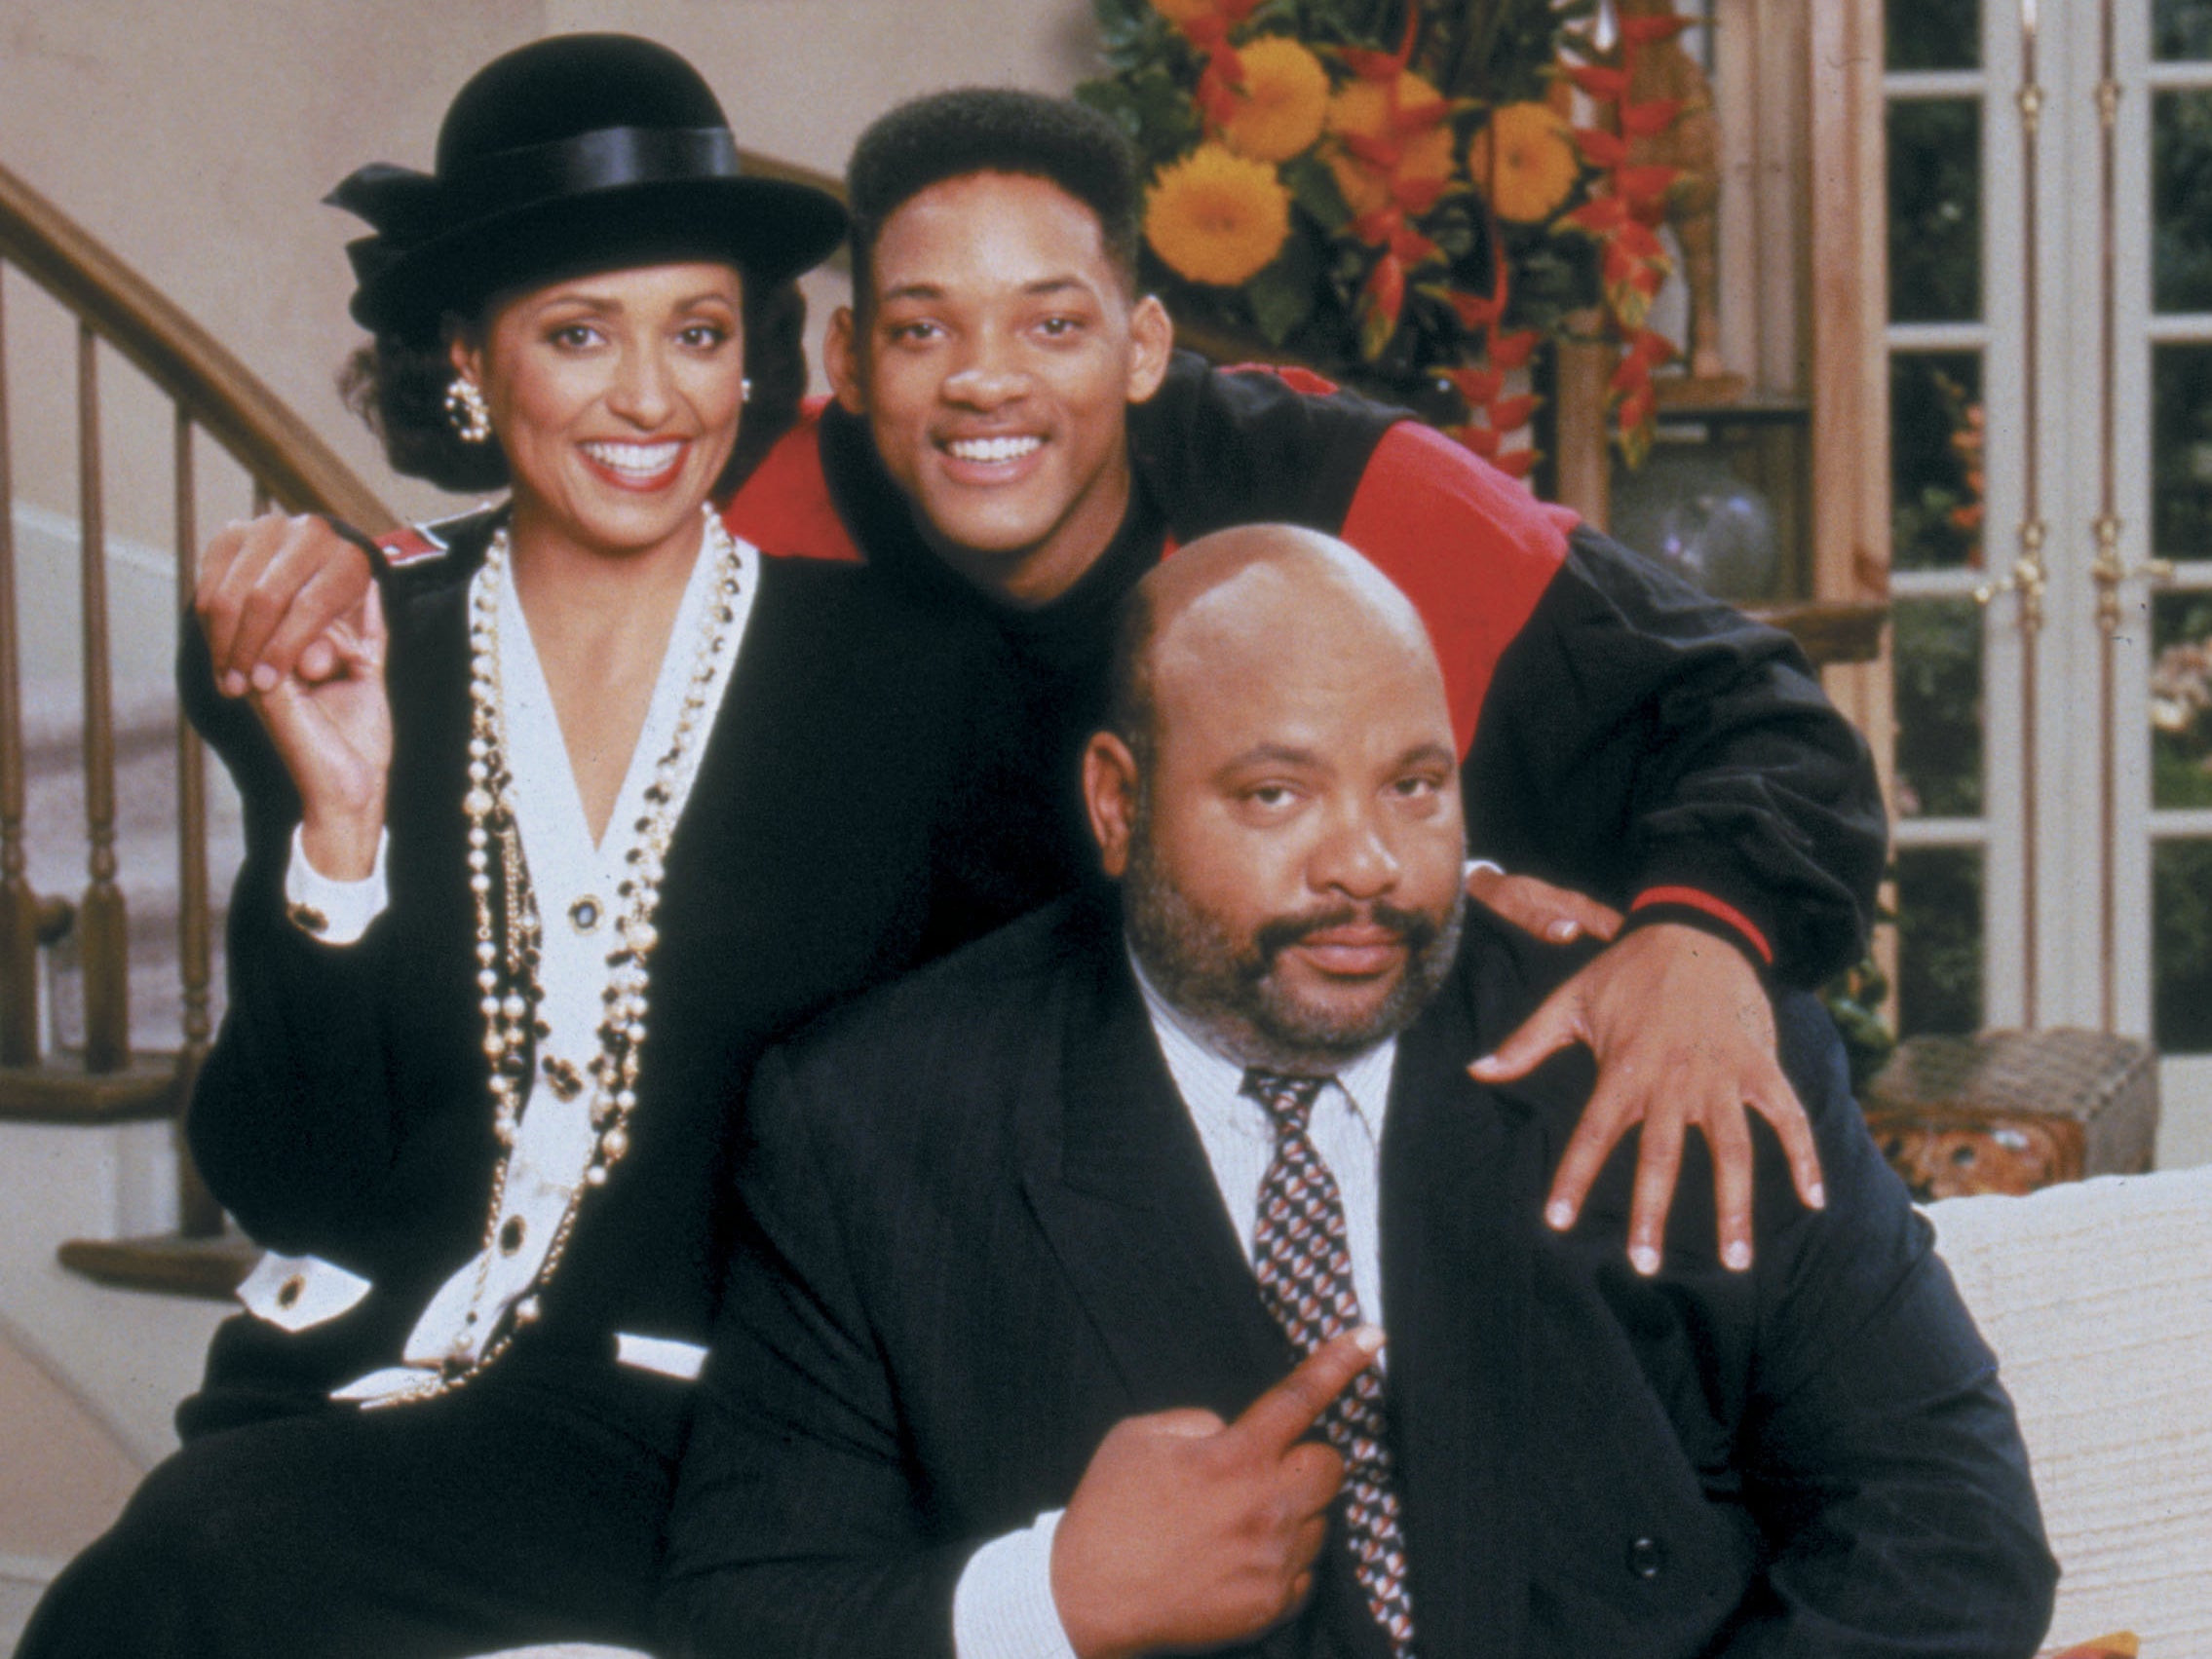 fresh prince of bel air episodes for free